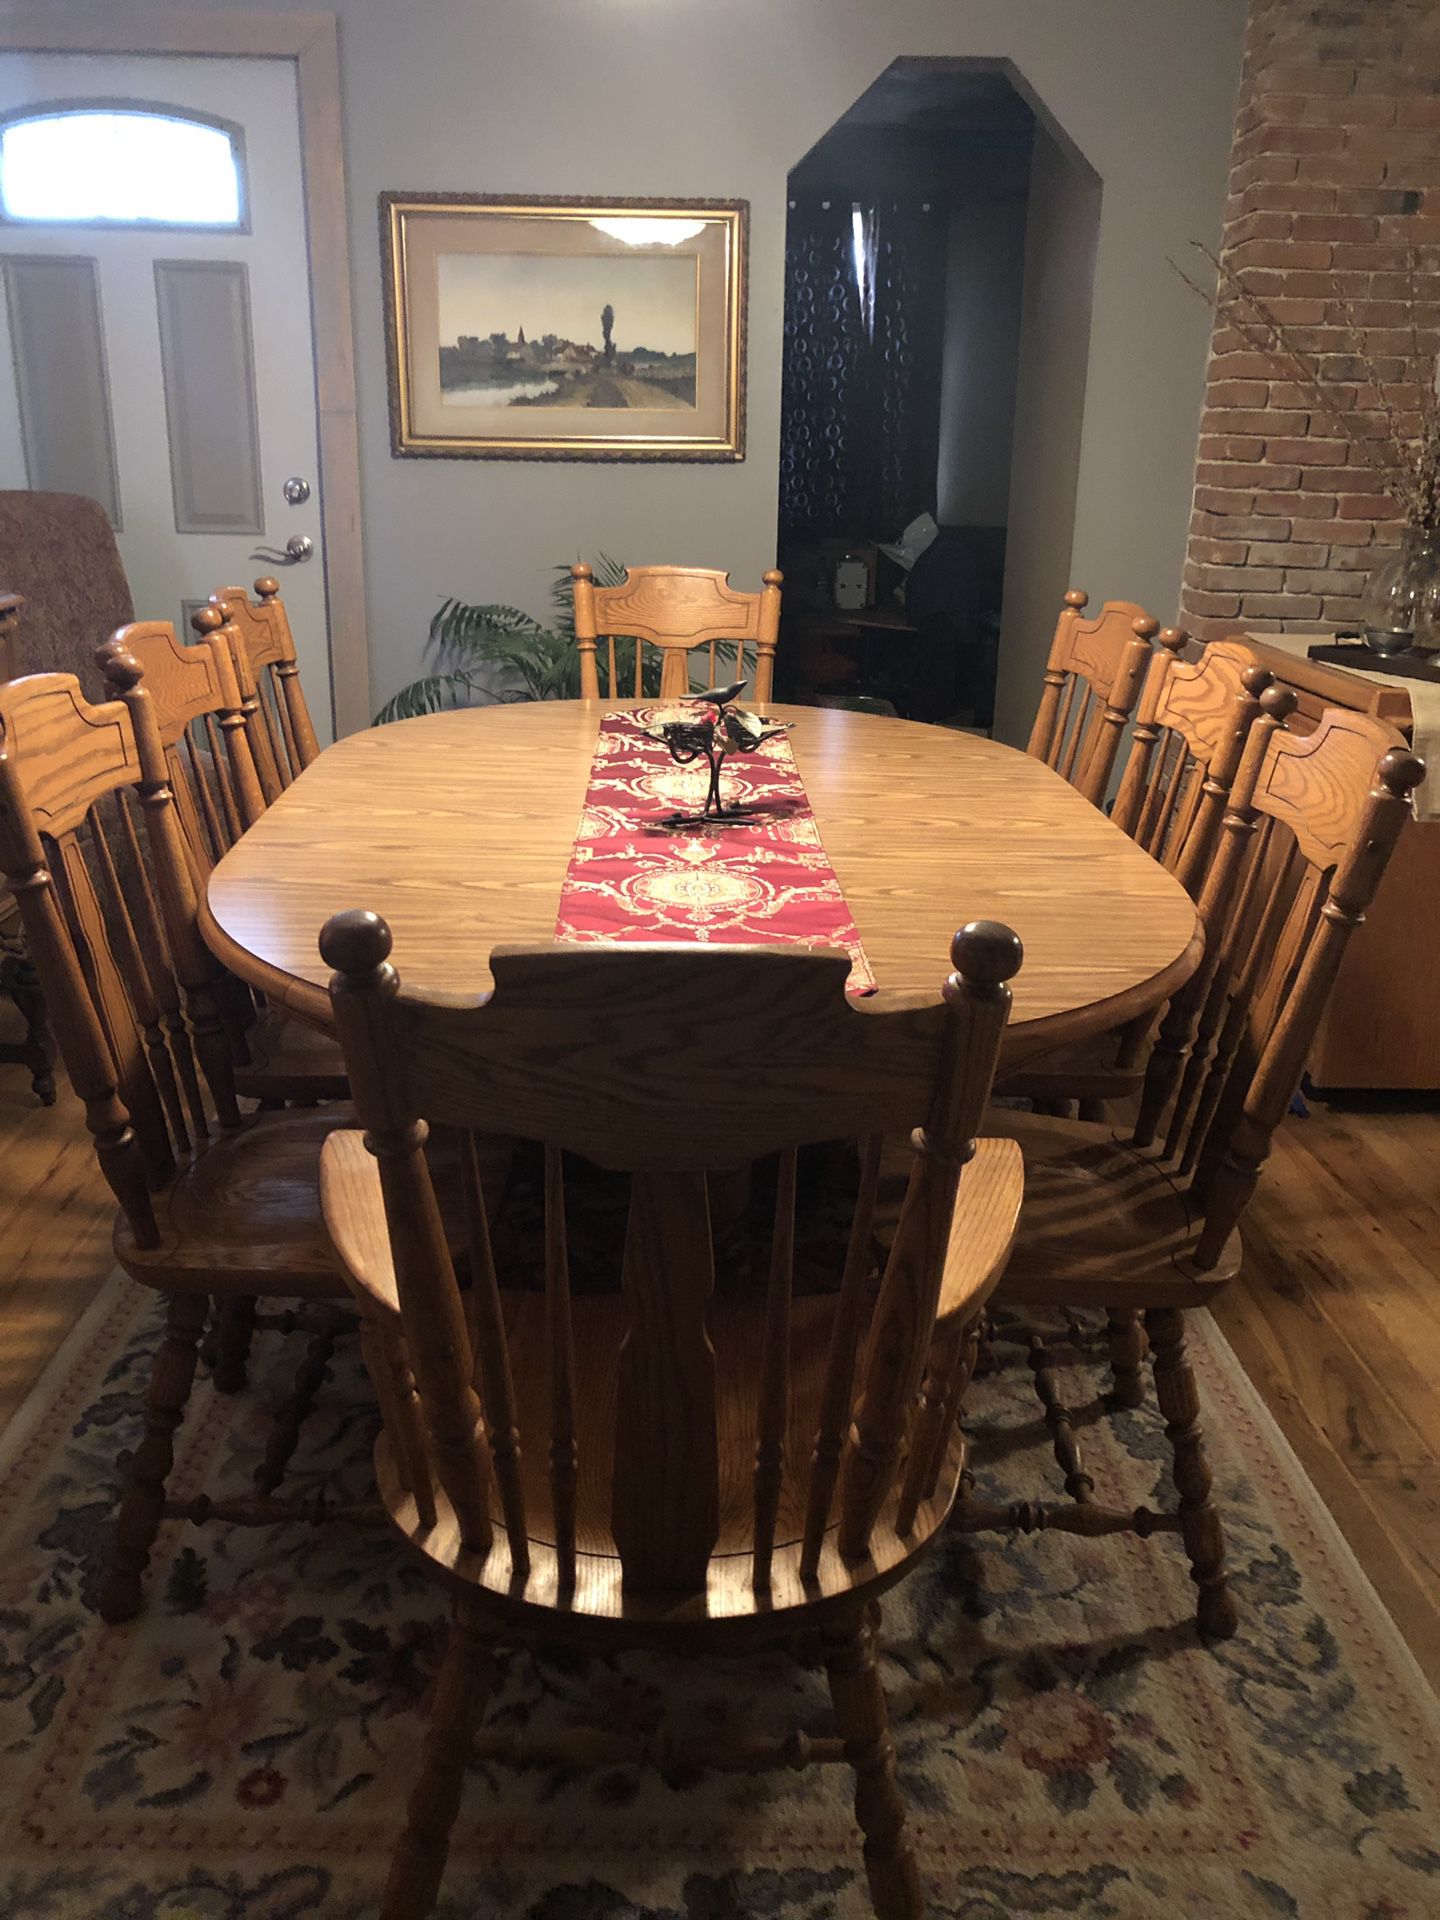 Oak Dining Room Table, dbl pedestal , 2 leafs, 8 chairs 2 pc. Hutch. Excellent condition. $800.00